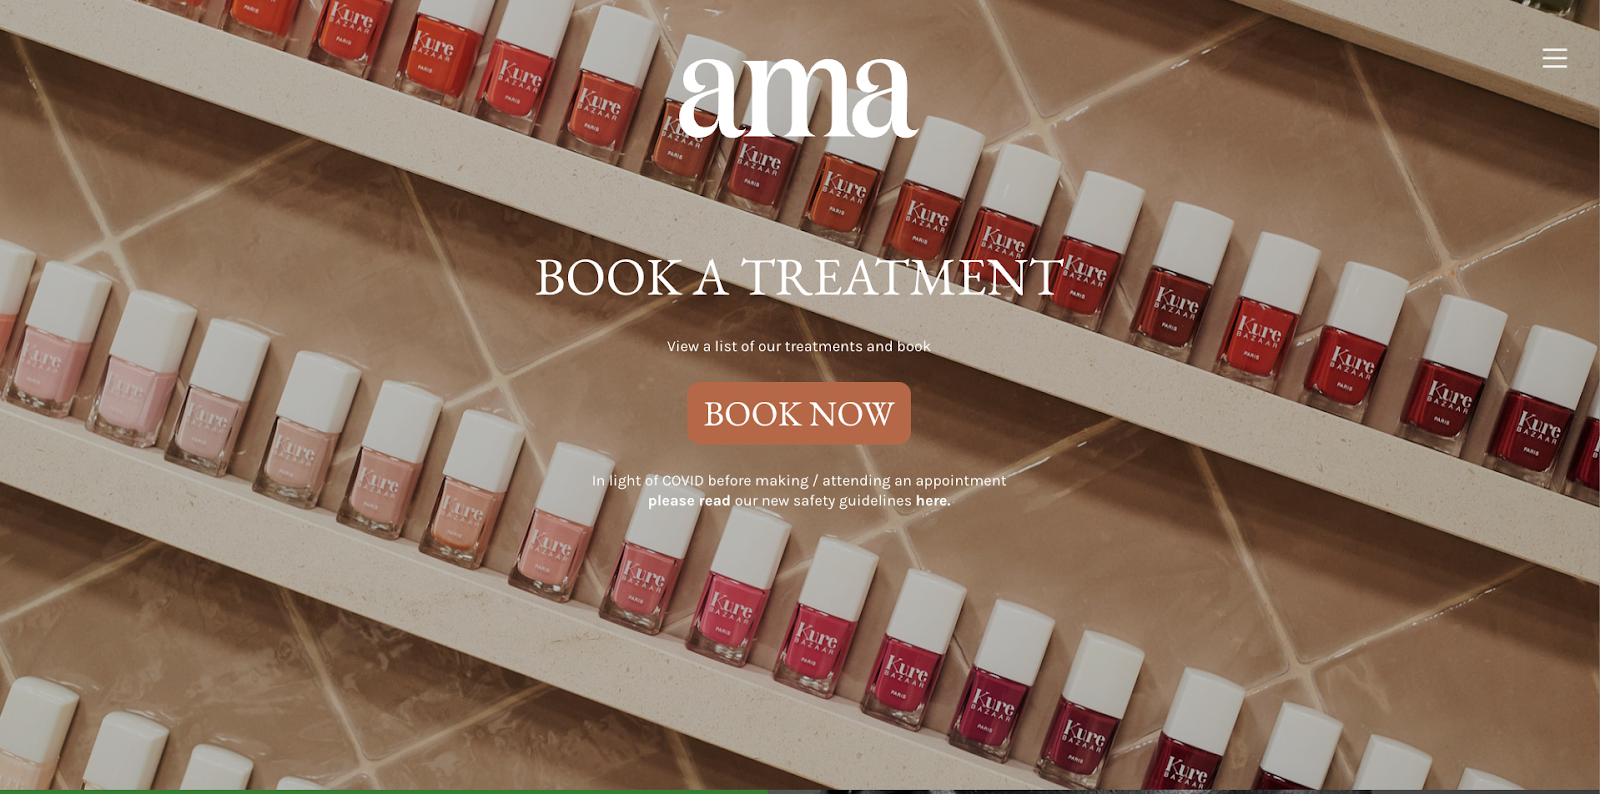 Best nail salon websites, example from Ama the Salon.